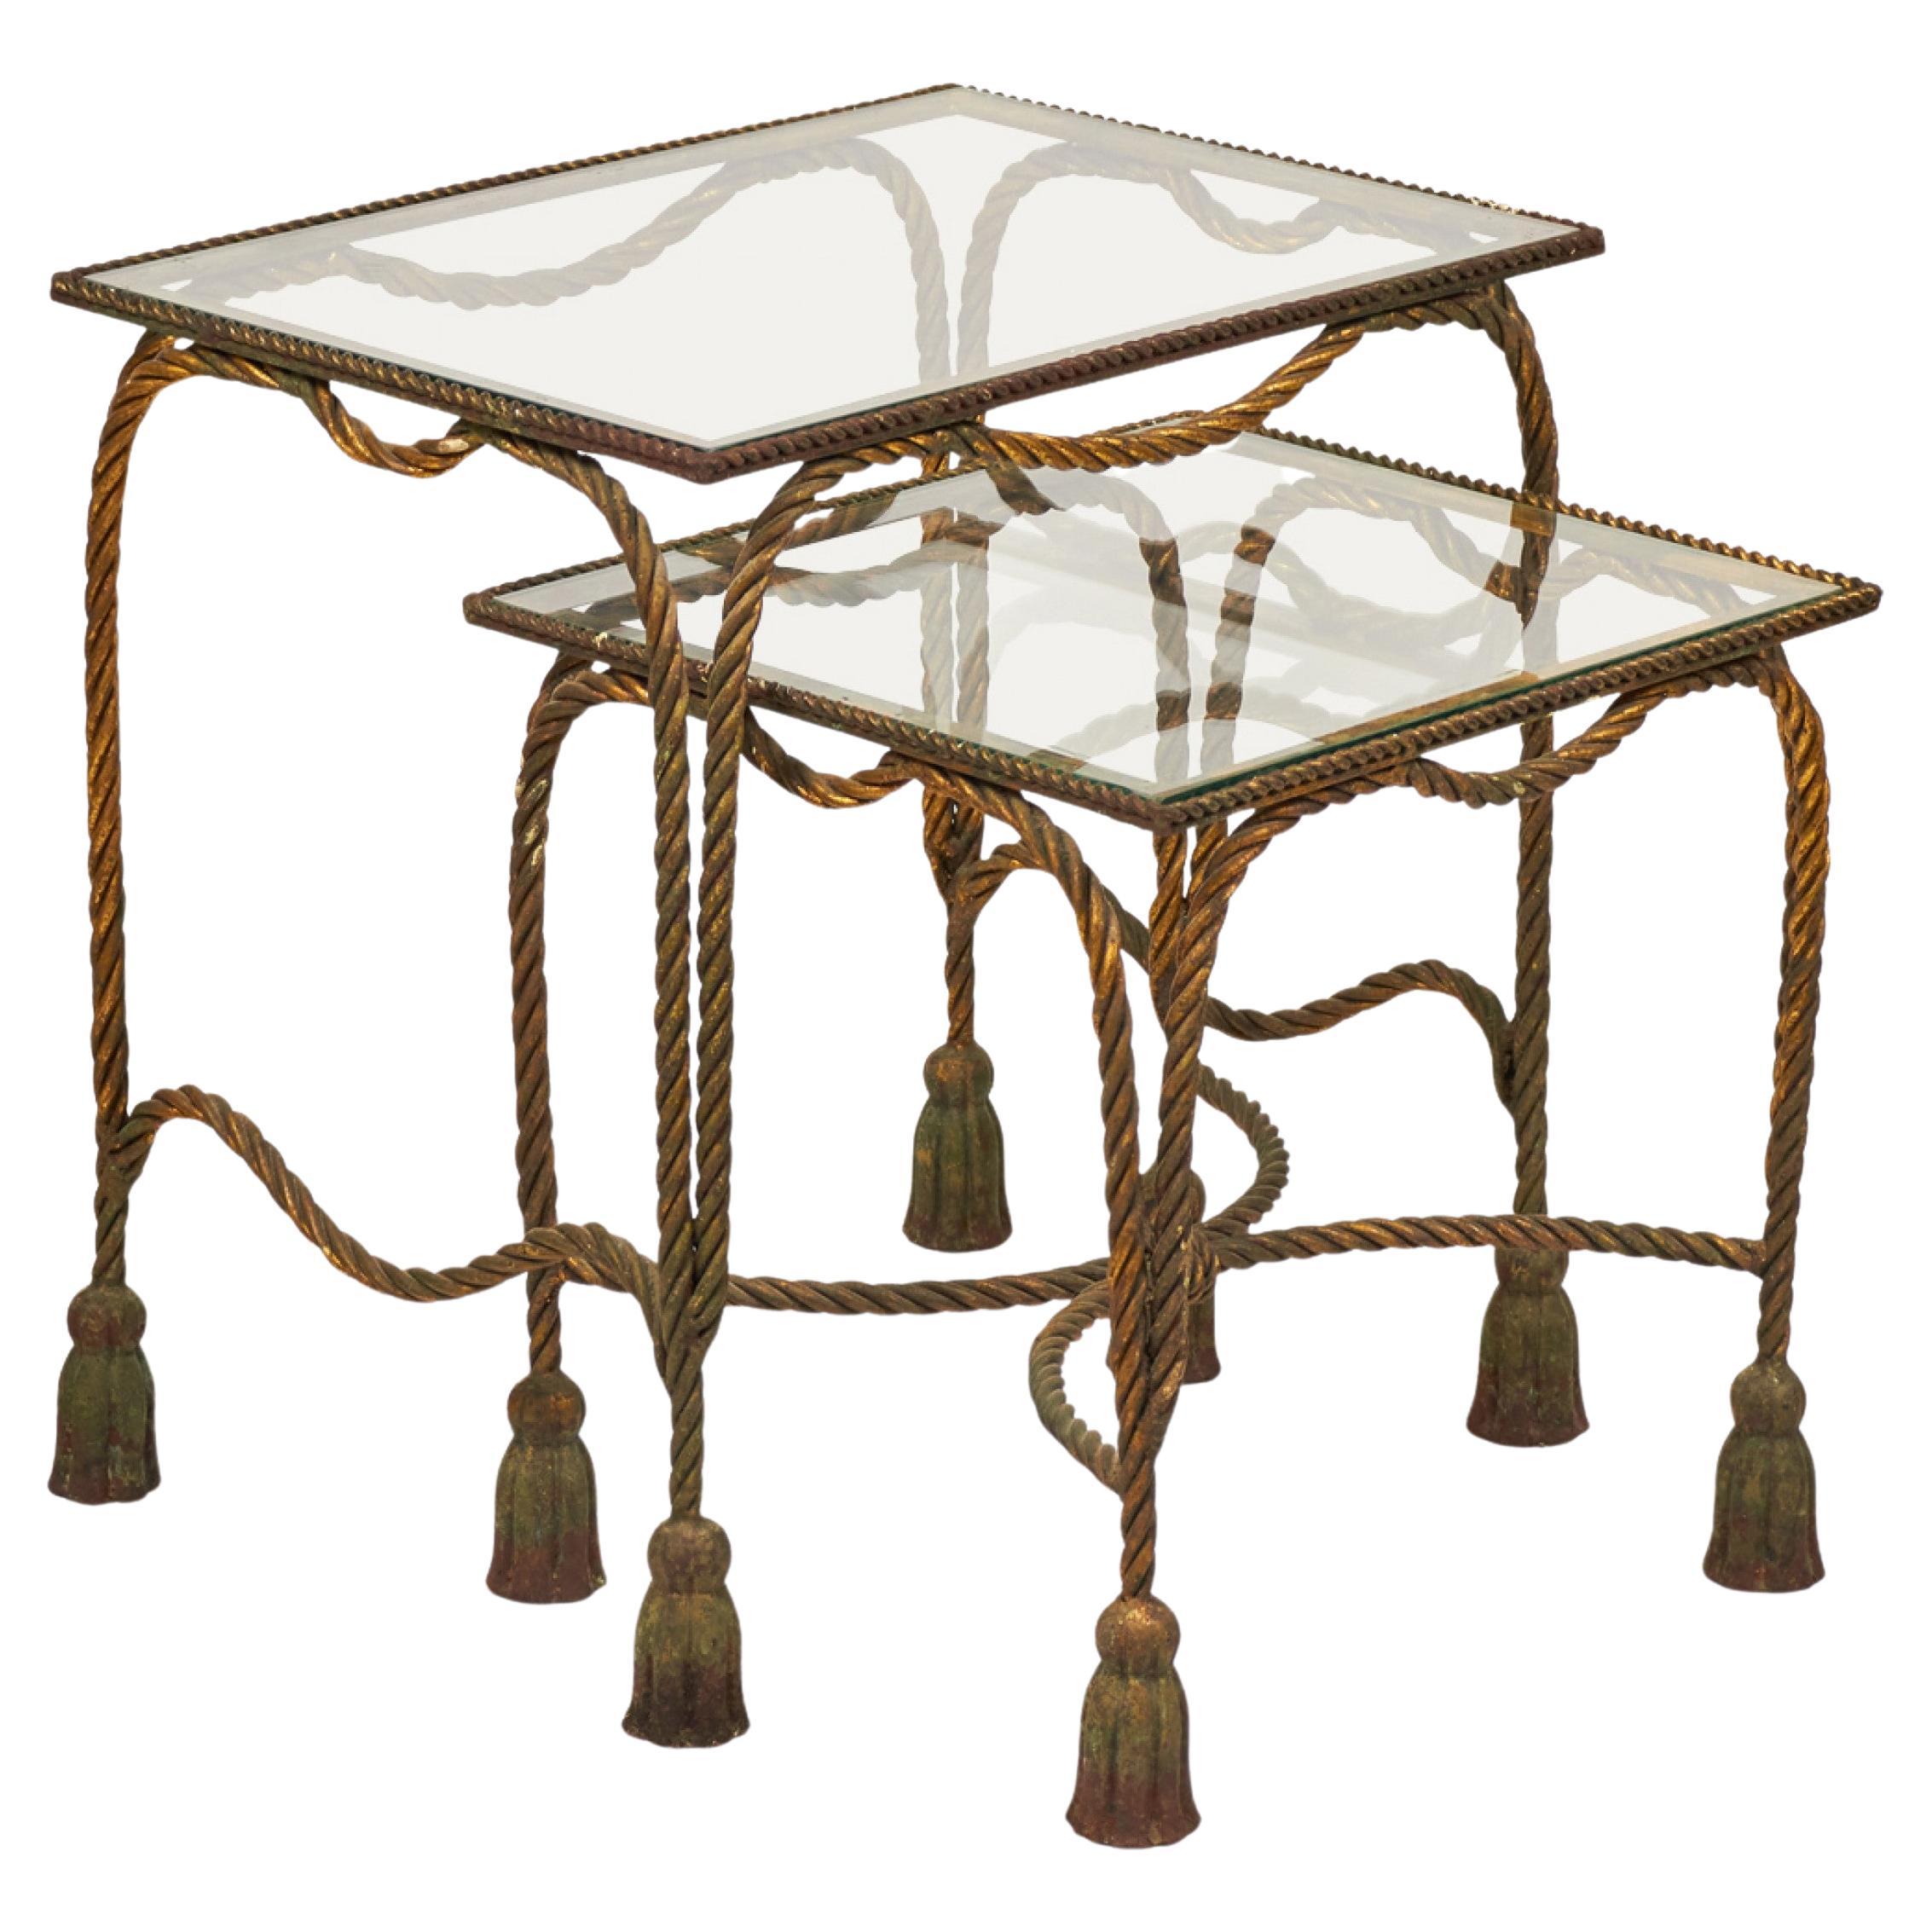 Palladio Italy Baroque Style Rope and Tassel Gilt Iron Nesting Tables